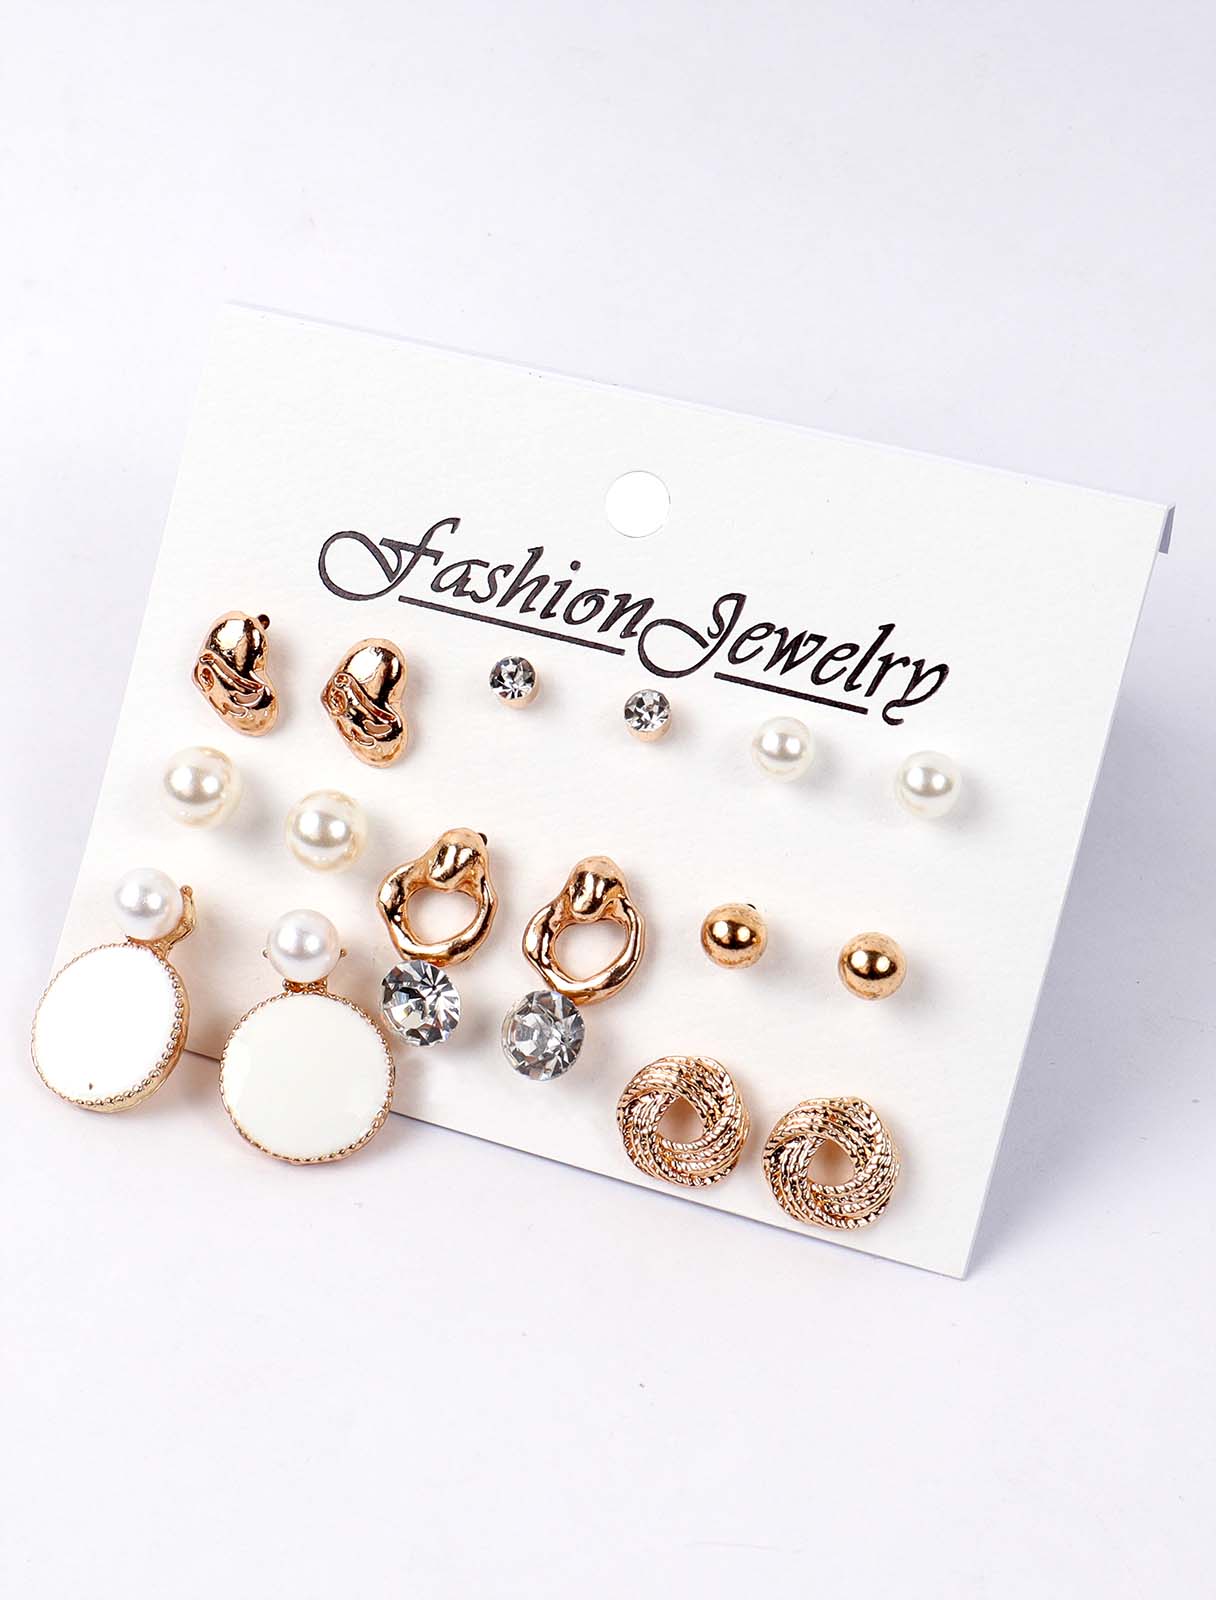 9 pieces earrings set in different designs